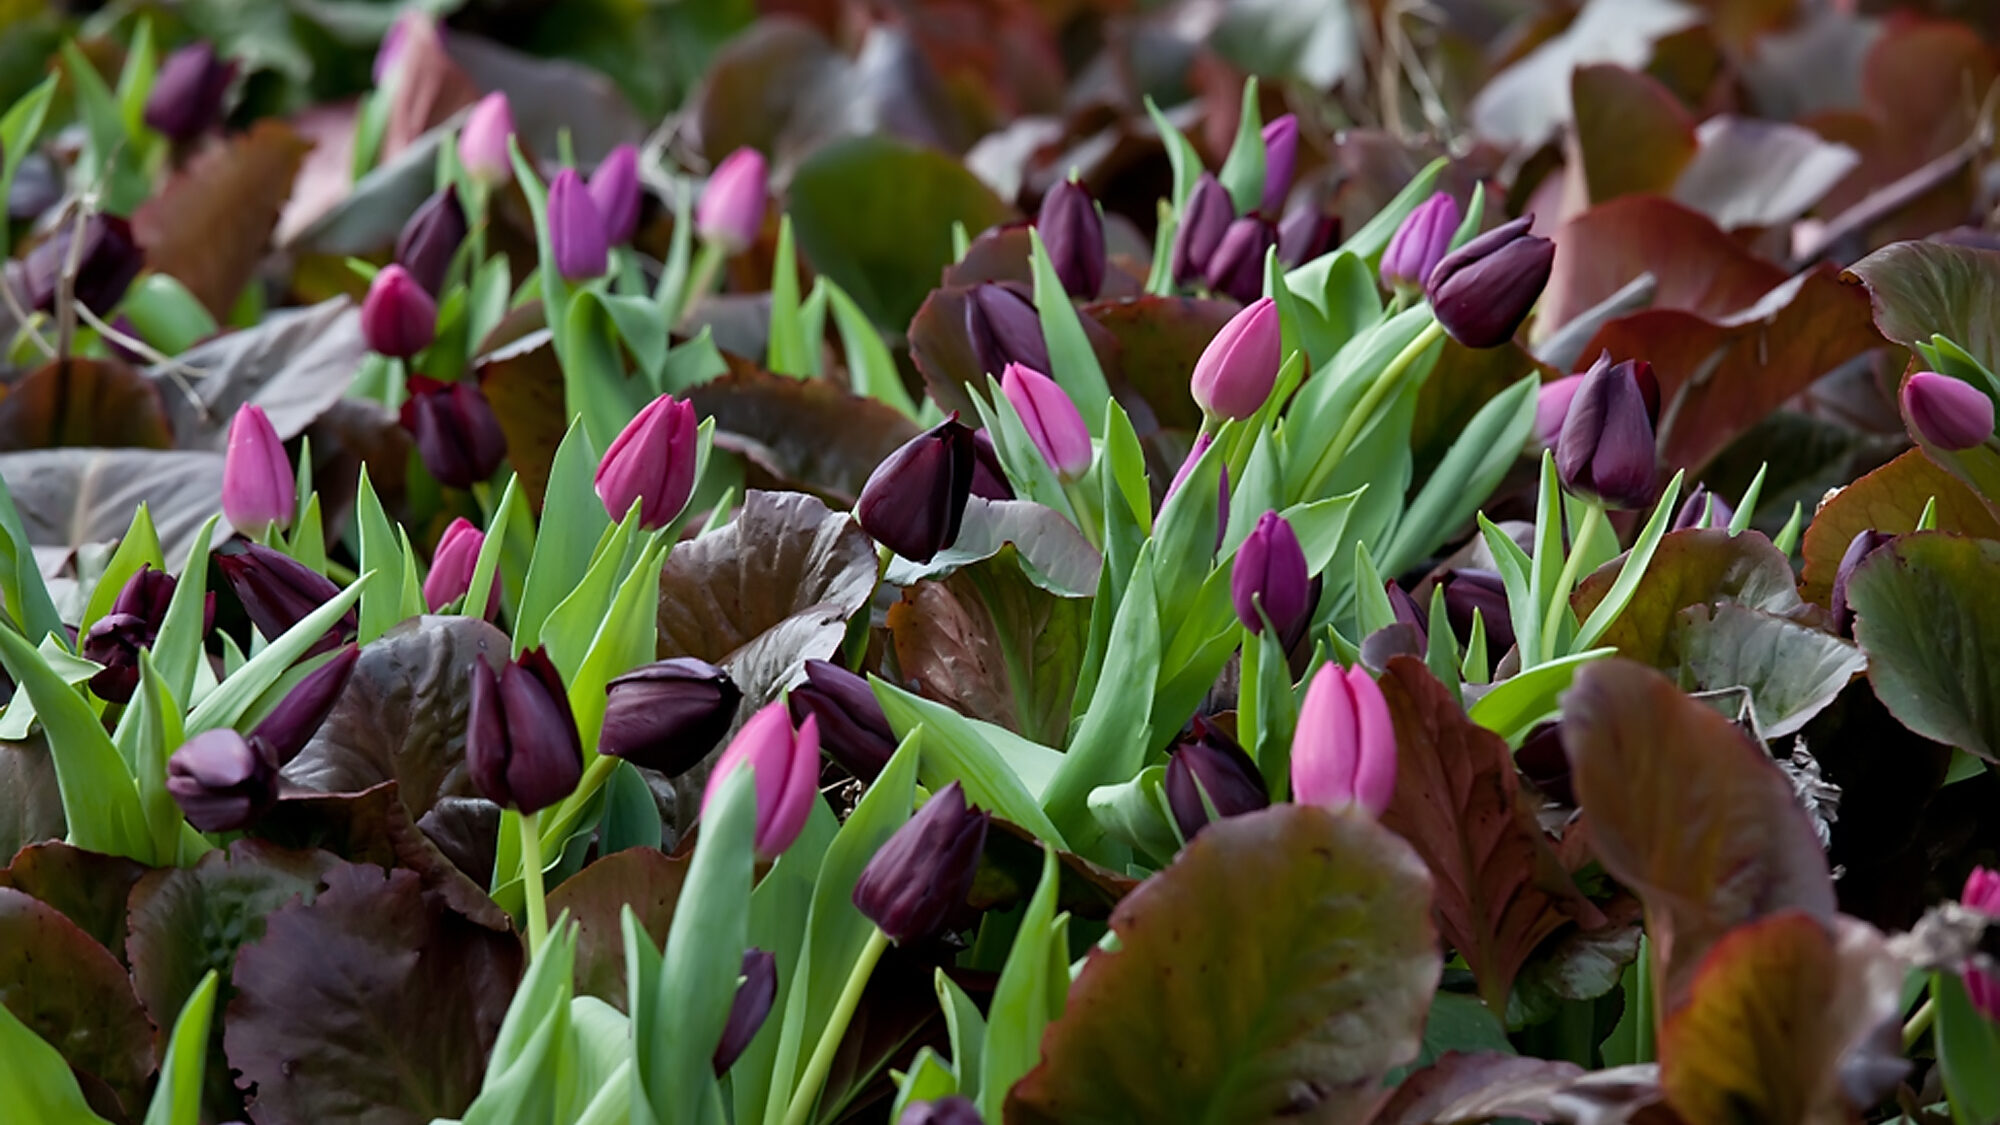 Two shades of purple tulips combine with a spring garden of emerging red-leafed lettuce. (Netherlan...